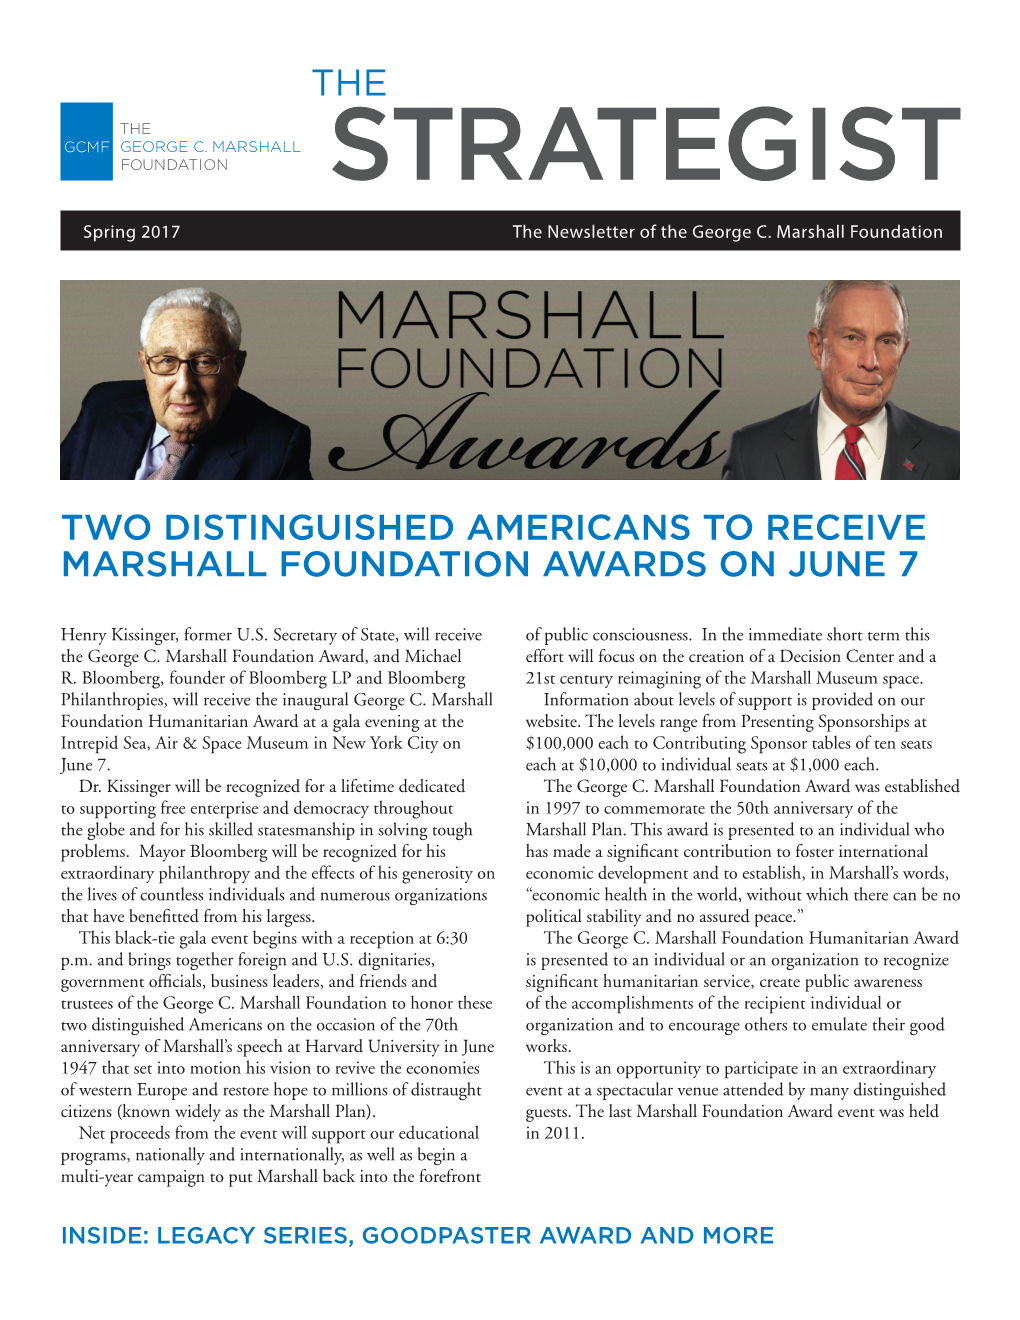 Two Distinguished Americans to Receive Marshall Foundation Awards on June 7